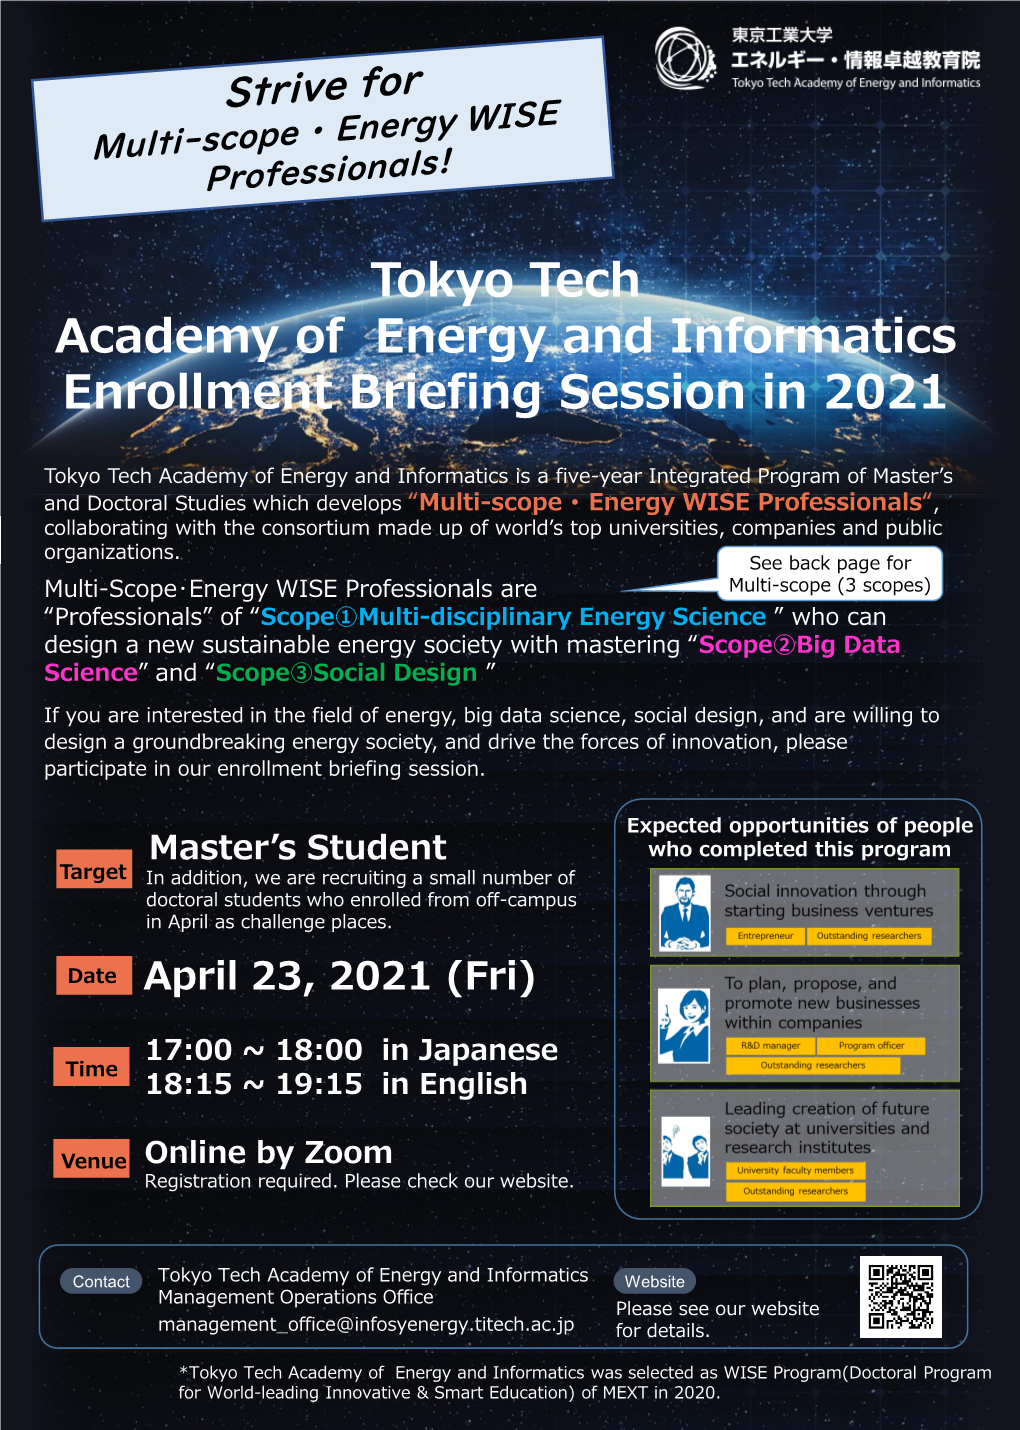 Tokyo Tech Academy of Energy and Informatics Enrollment Briefing Session in 2021